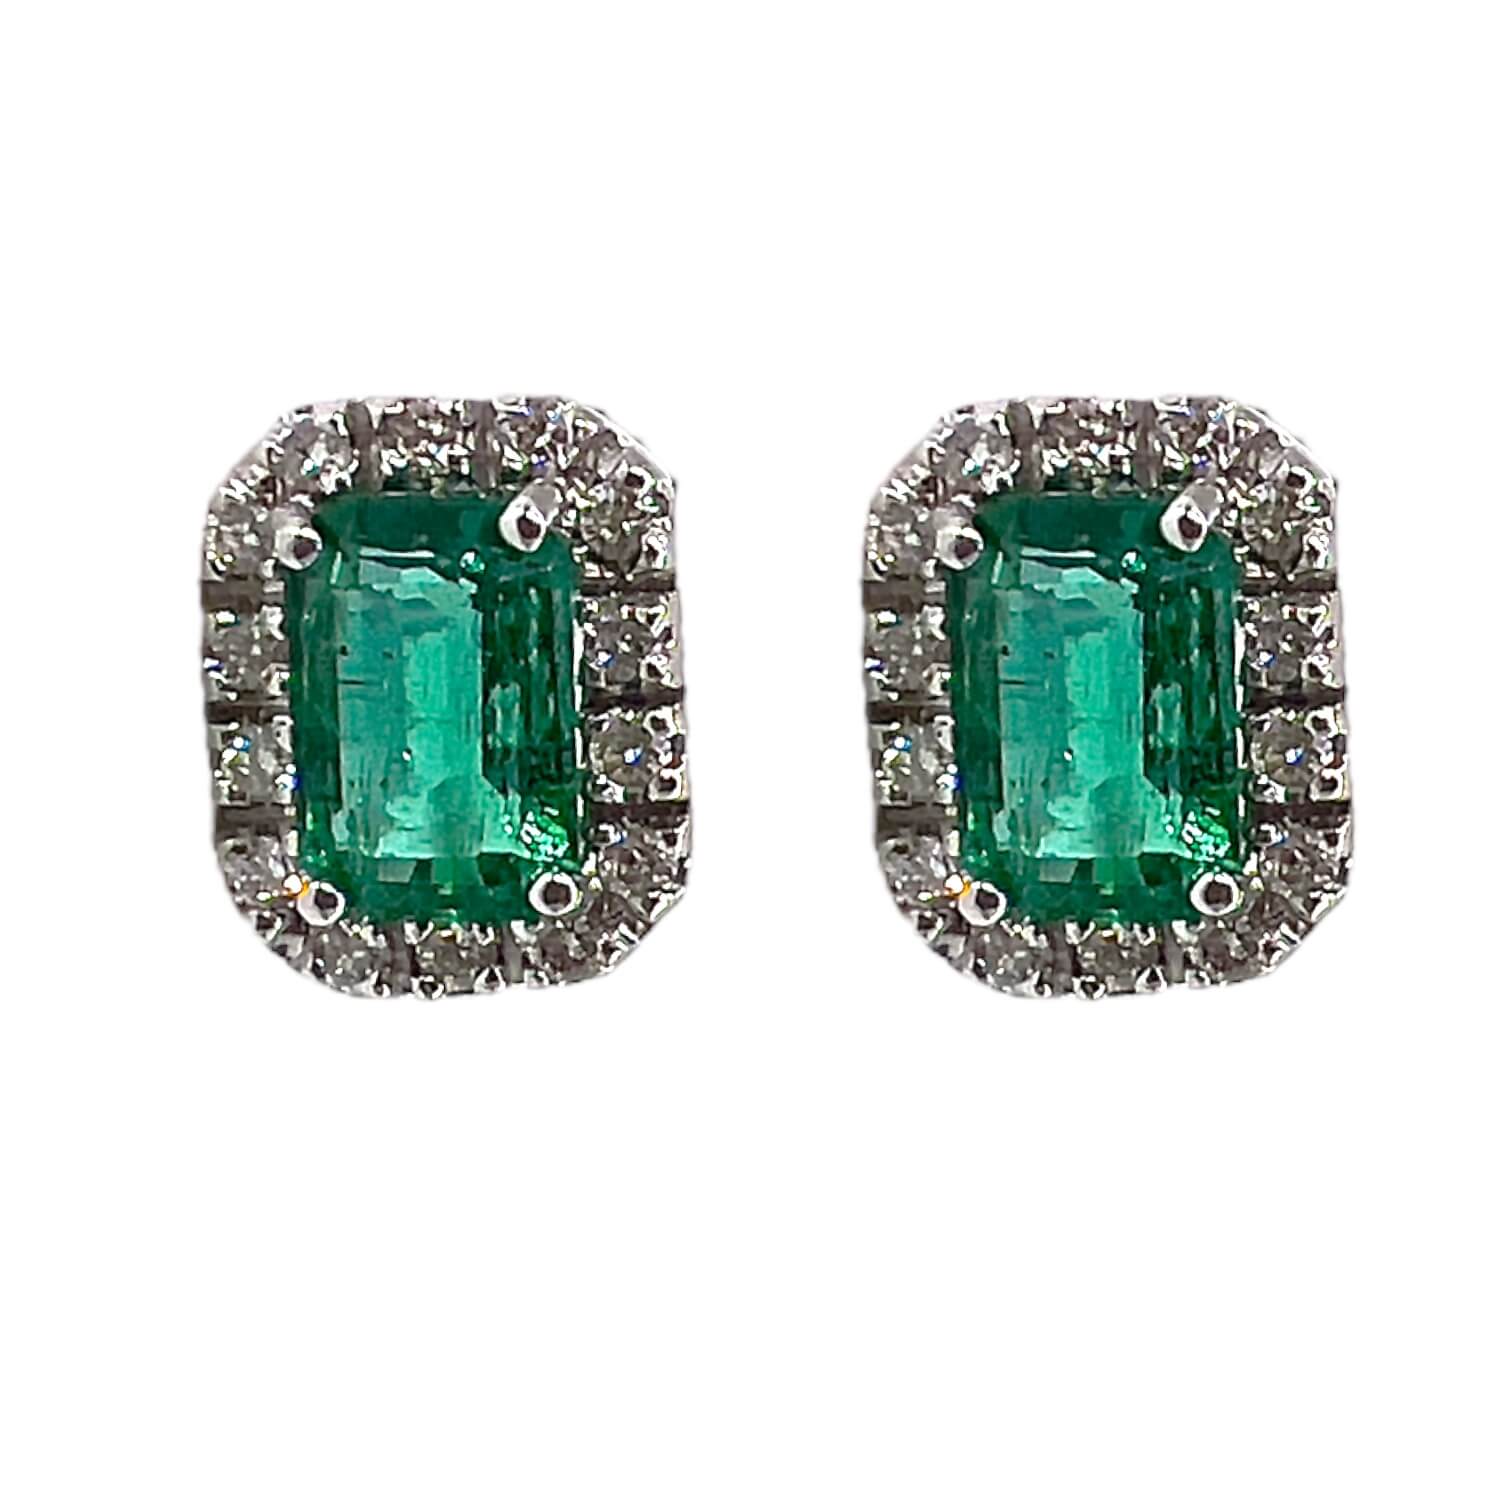 BELLE EPOQUE gold emerald and diamond earrings Art.OR1571-1